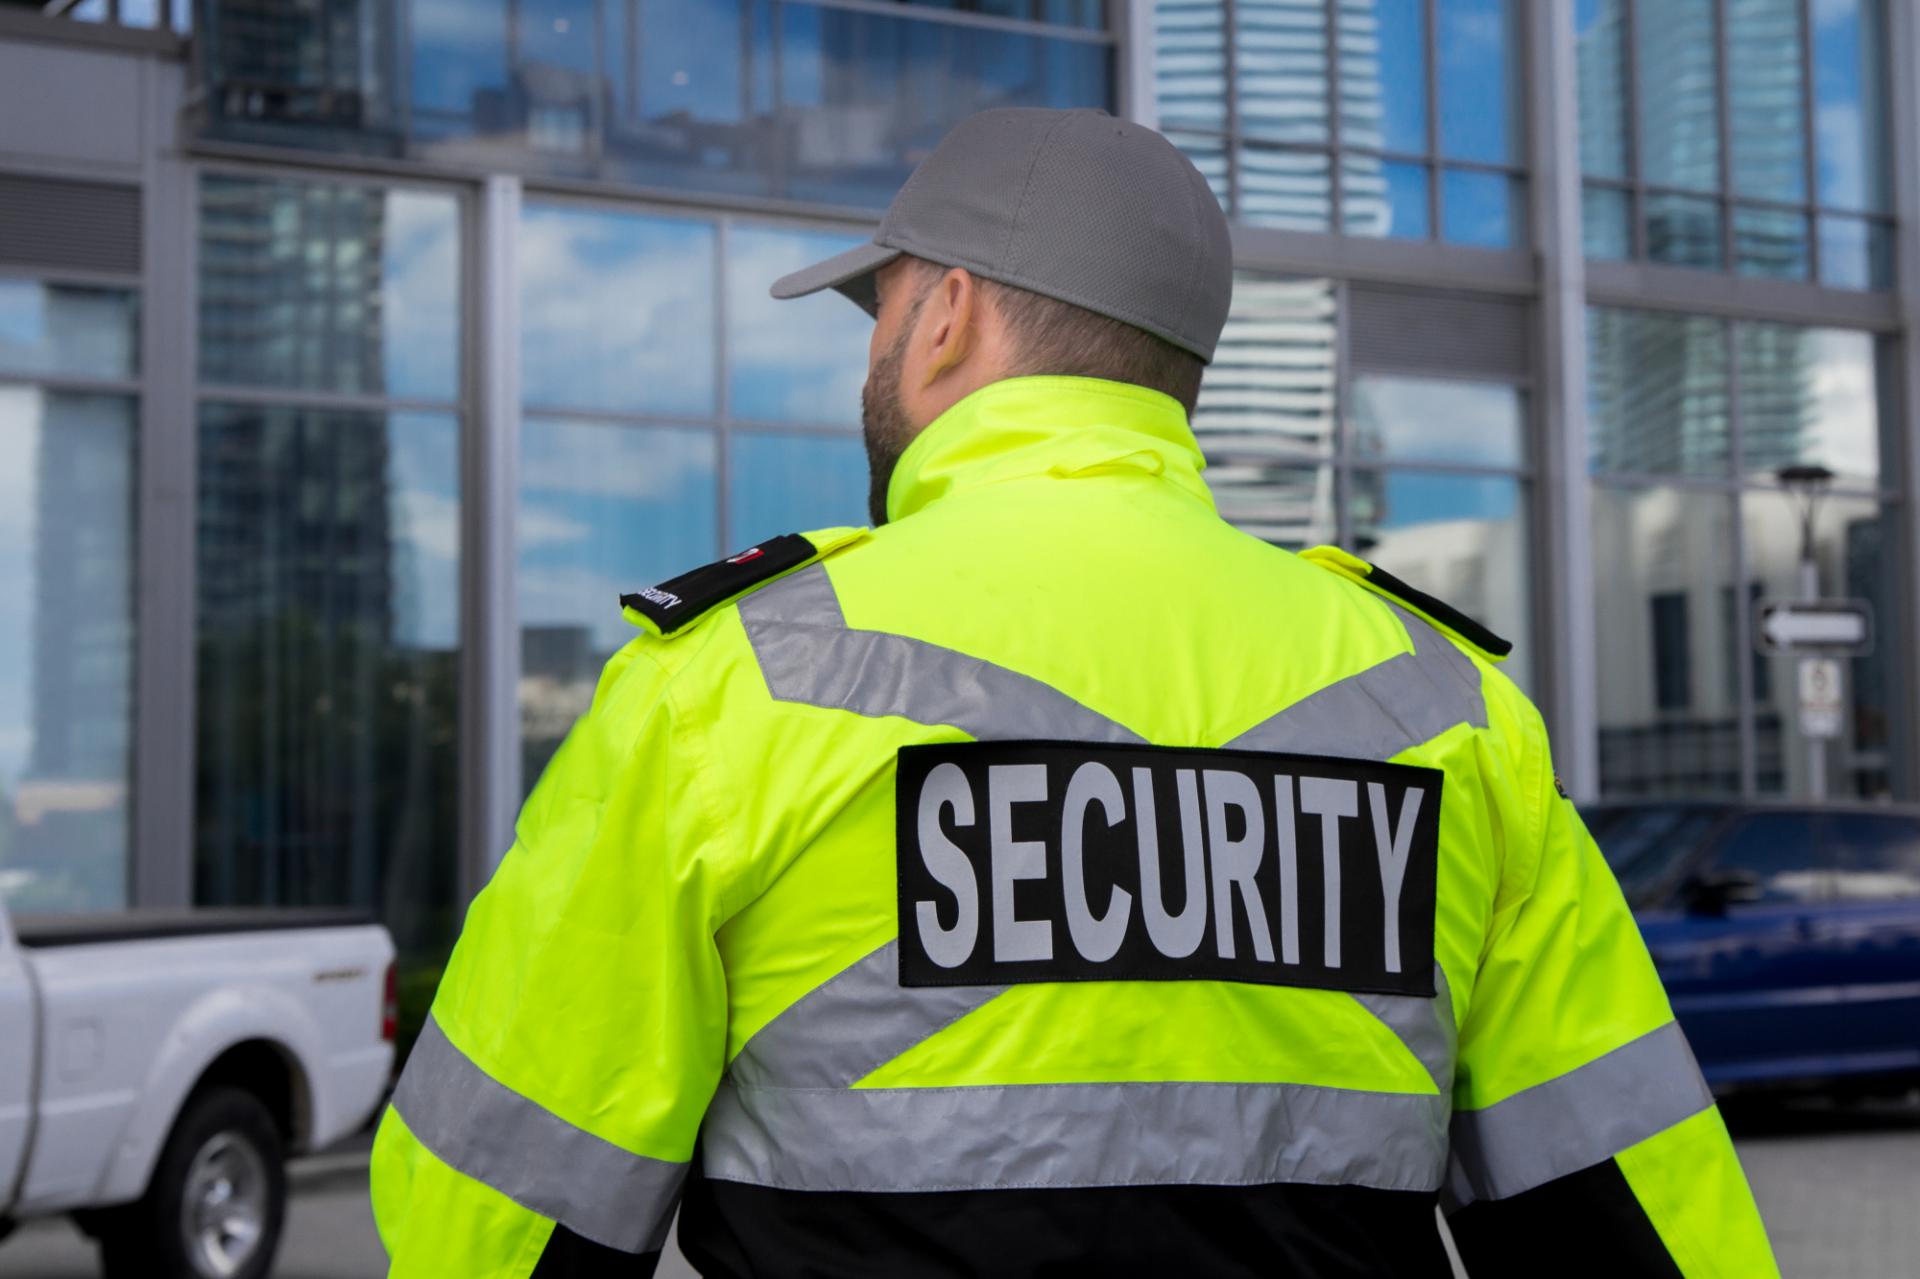 Security consultancy acquired in MBO